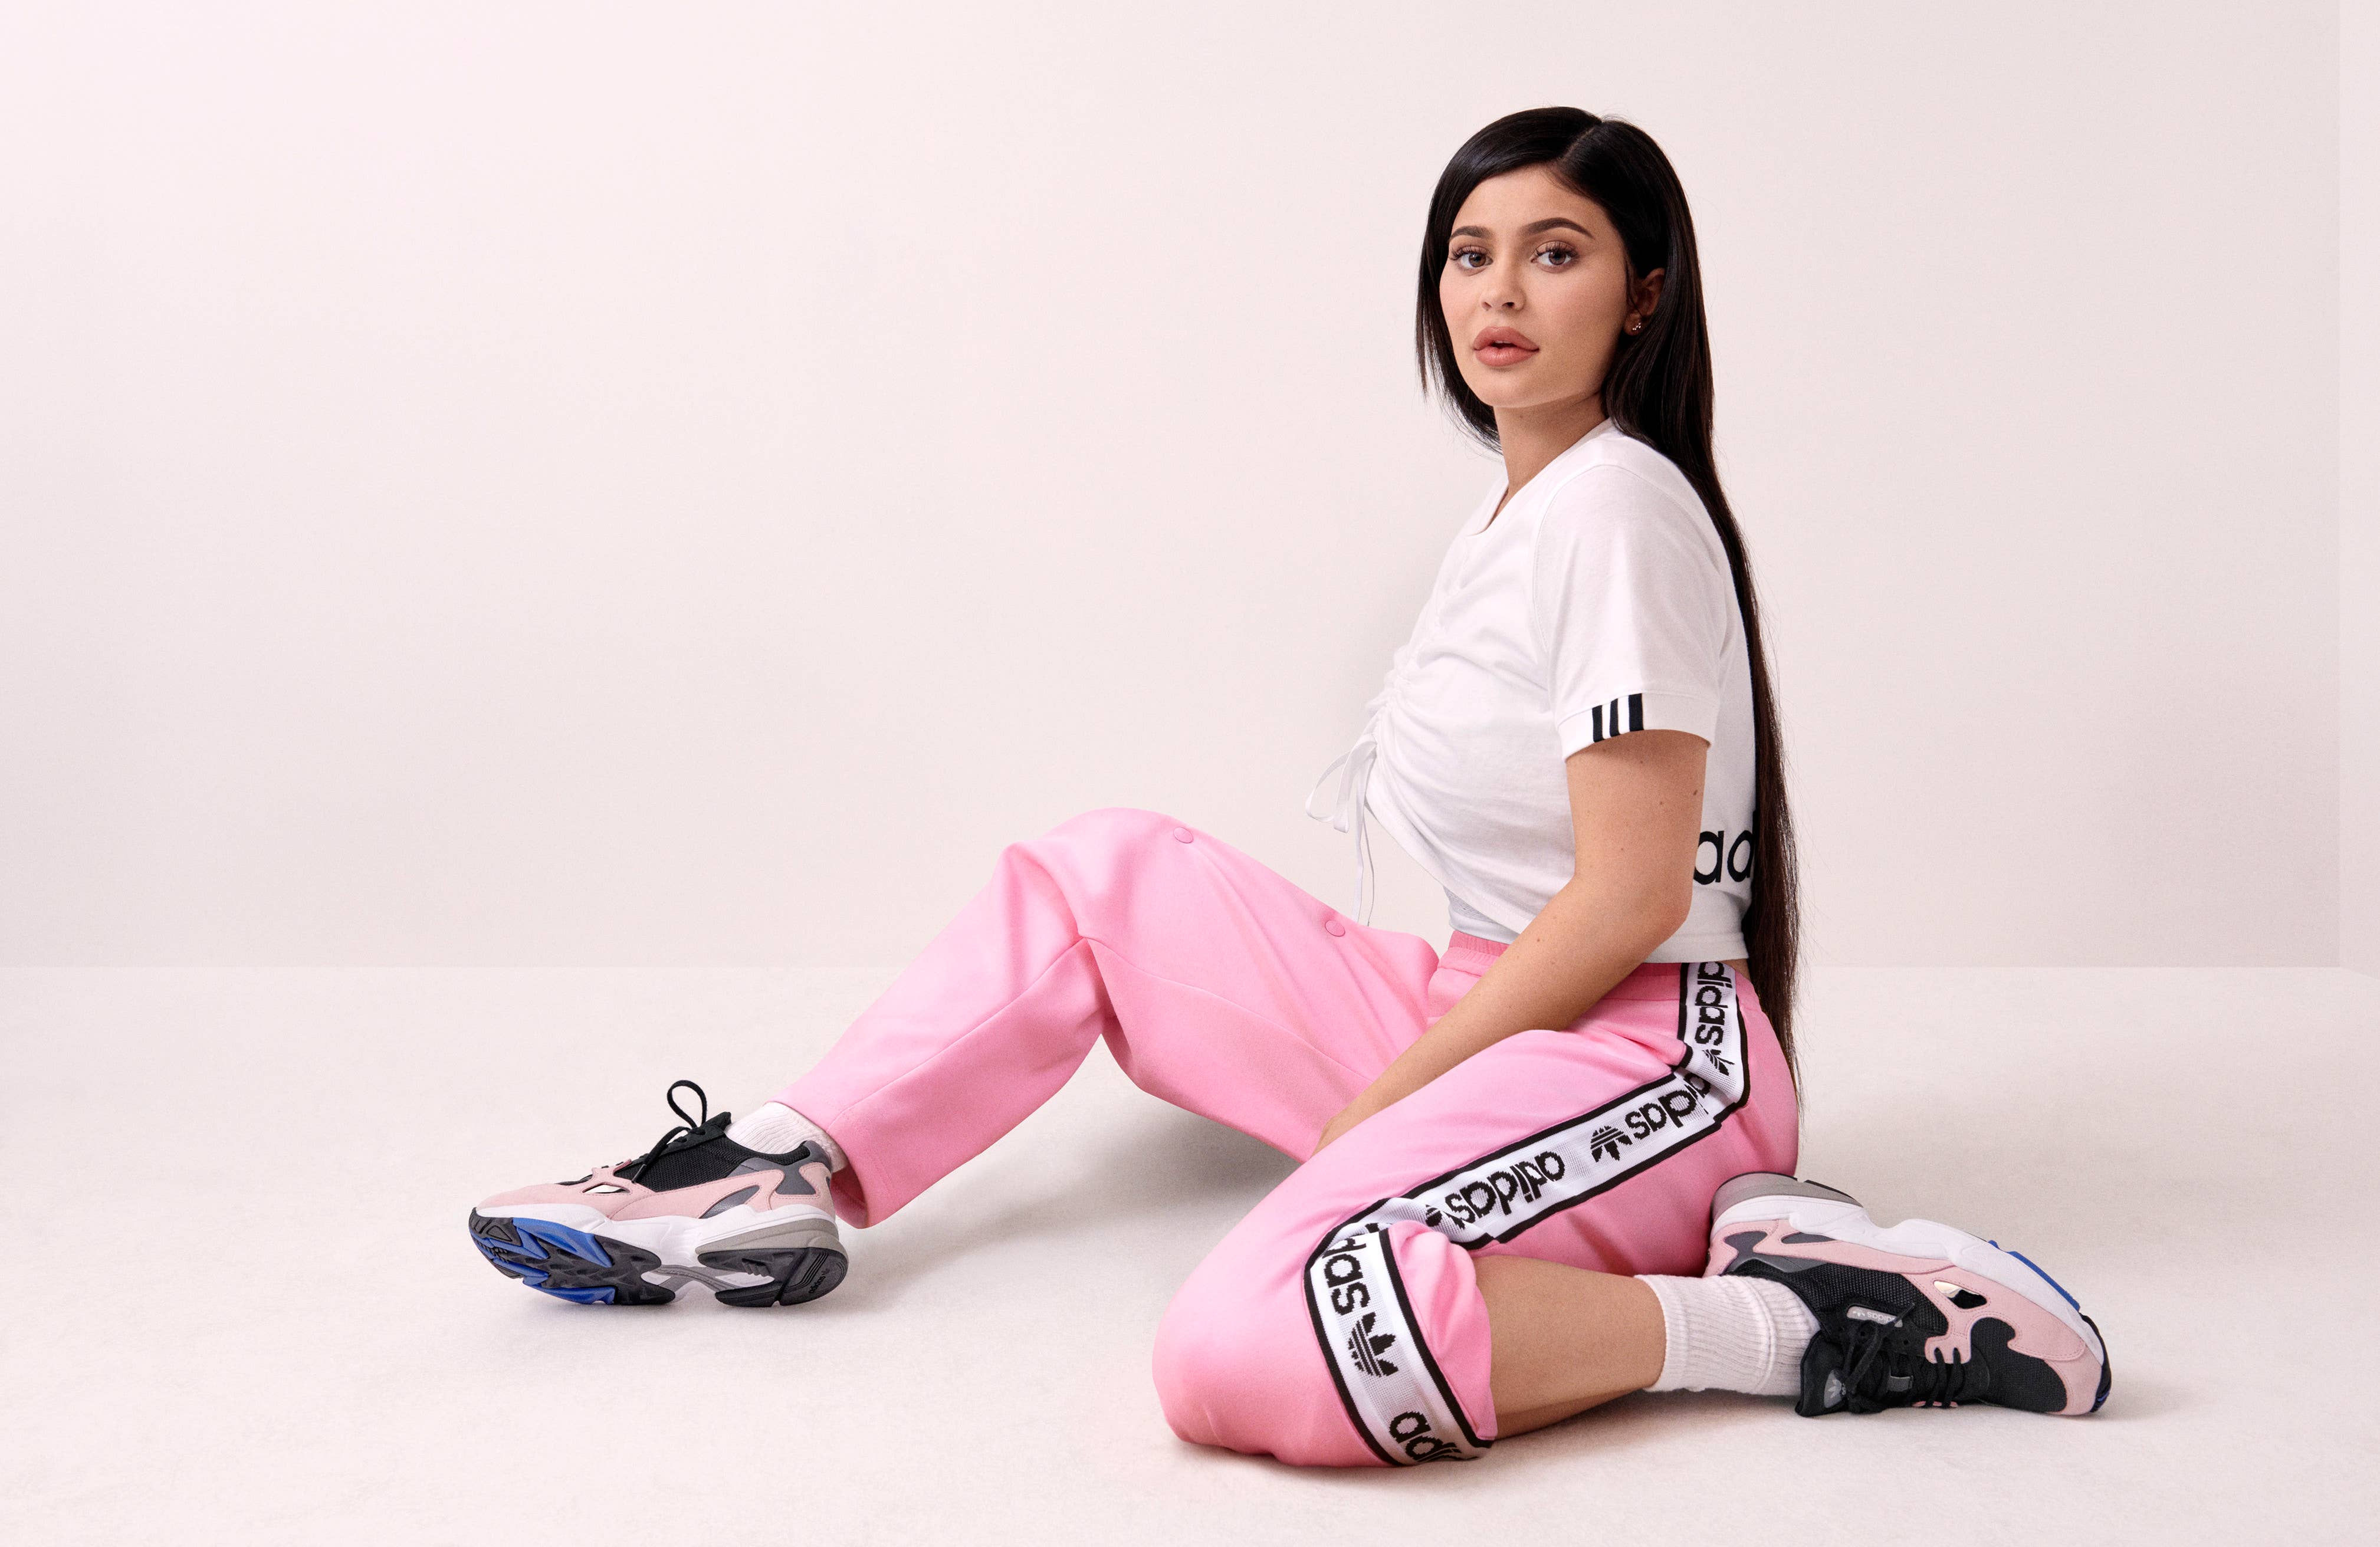 adidas kylie jenner shoes